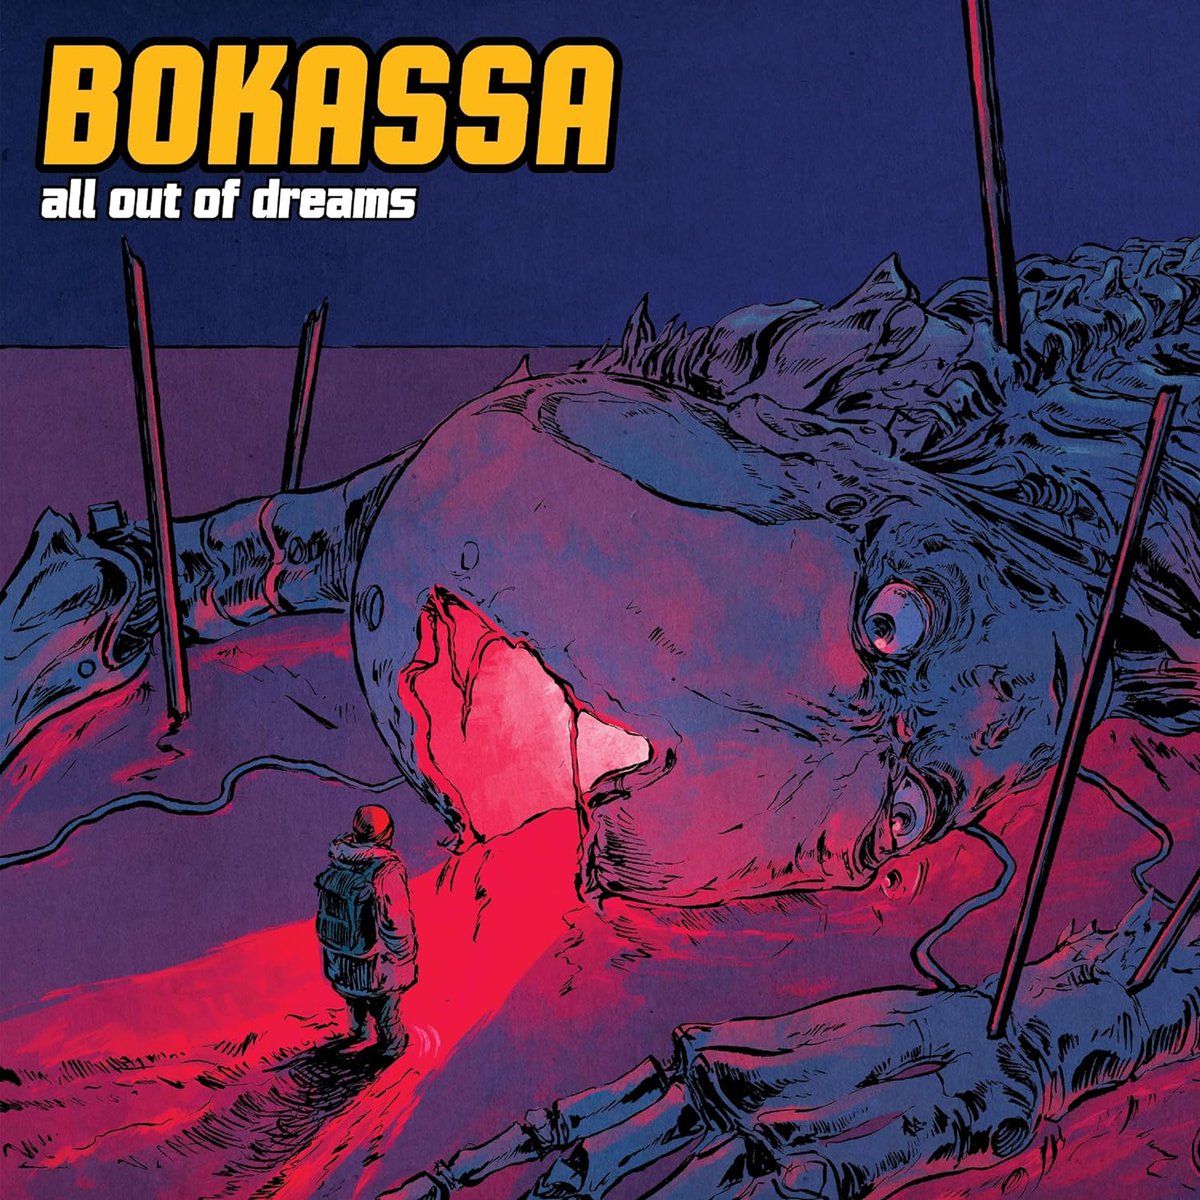 Bokassa unleash their new LP All Out of Dreams, a whirlwind of ten tracks in 30 minutes that proves they’re definitely not all out of riffs. Guests include Lou Koller of @SOIANYC and Aaron Beam of @RedFang. @Bokassaband @IndieRecordings @CosaNostraPR newreleasesnow.com/album/bokassa-…